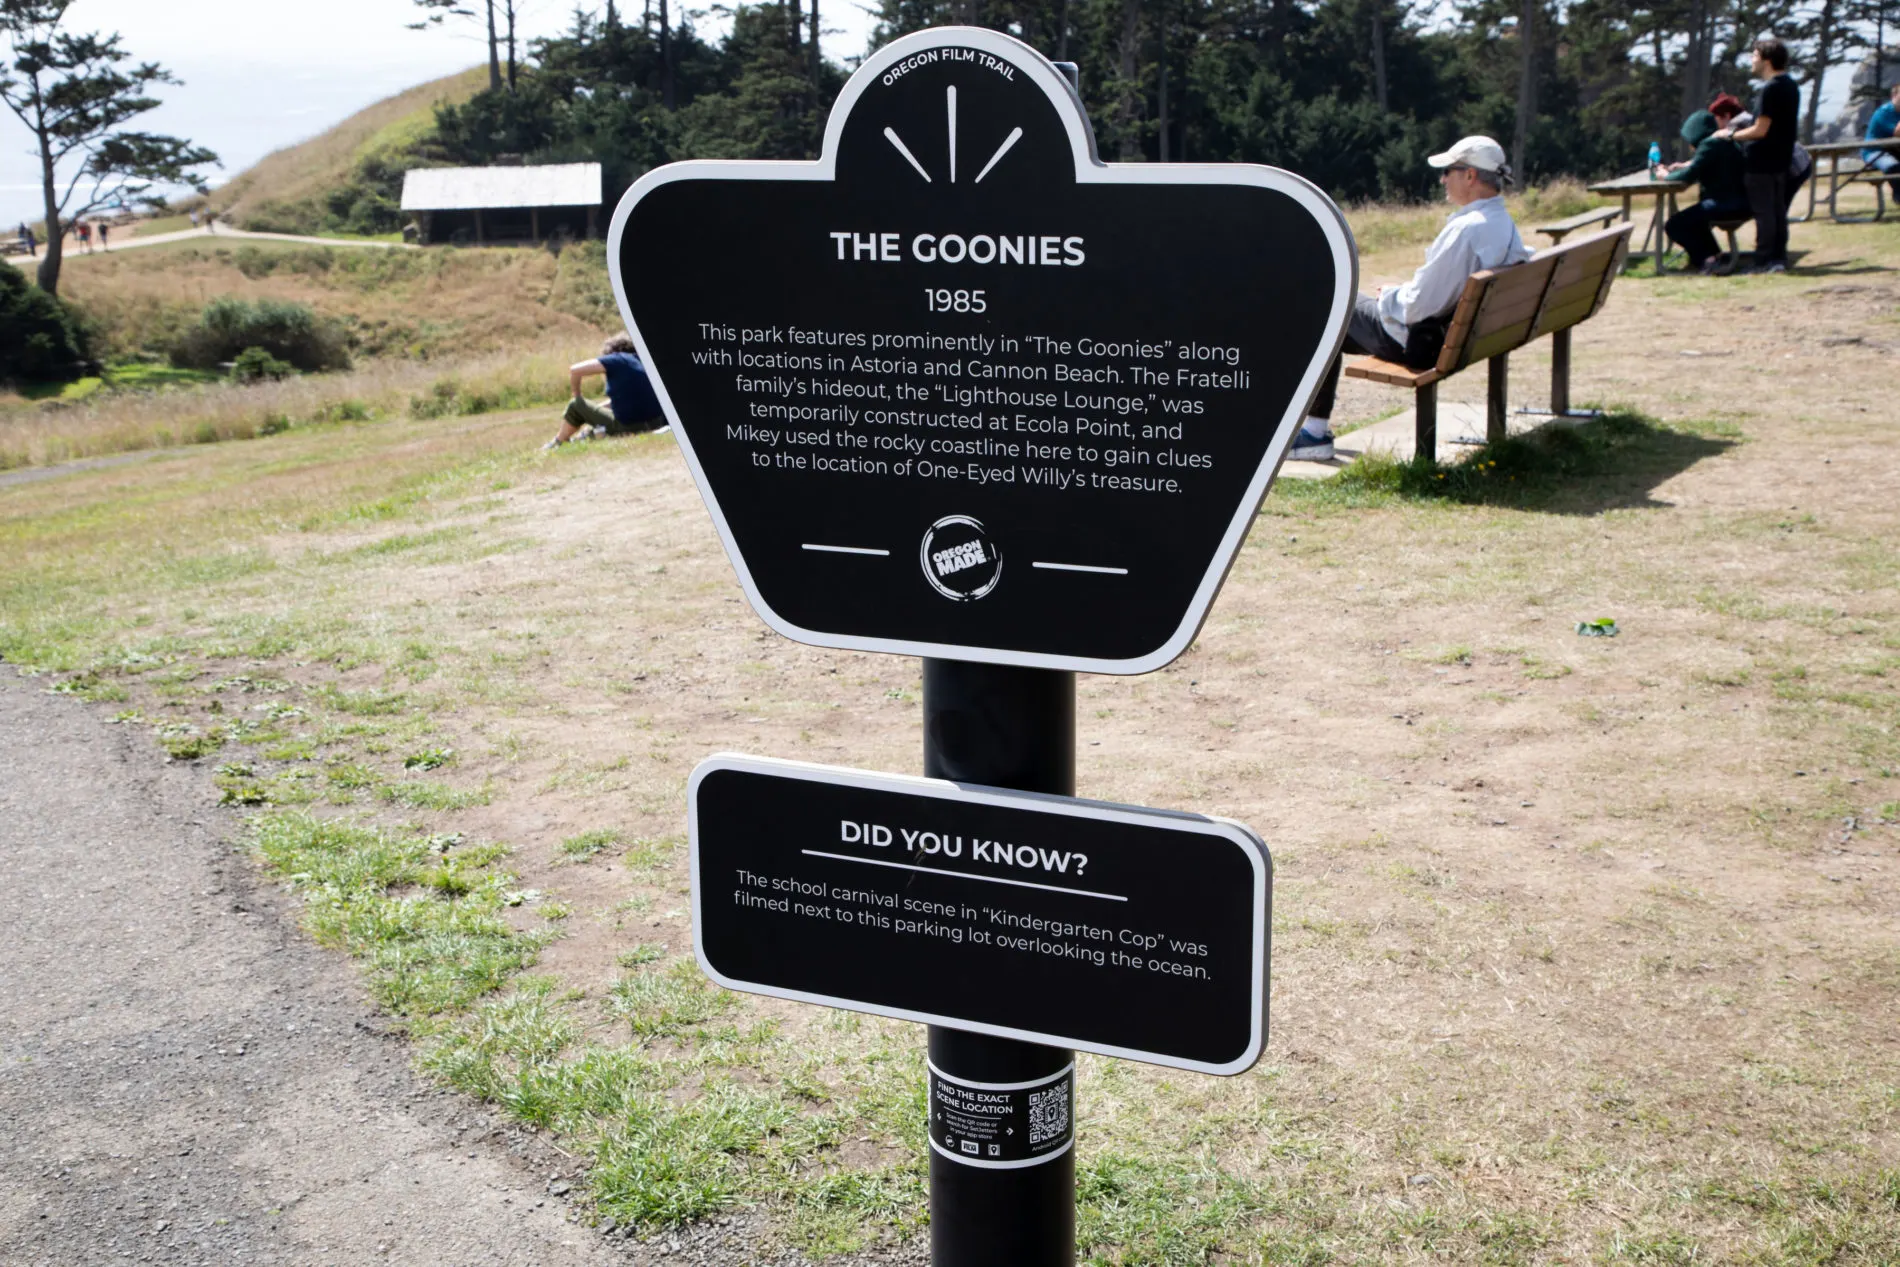 Astoria, a well-known city, in Oregon is the home of the Goonies.